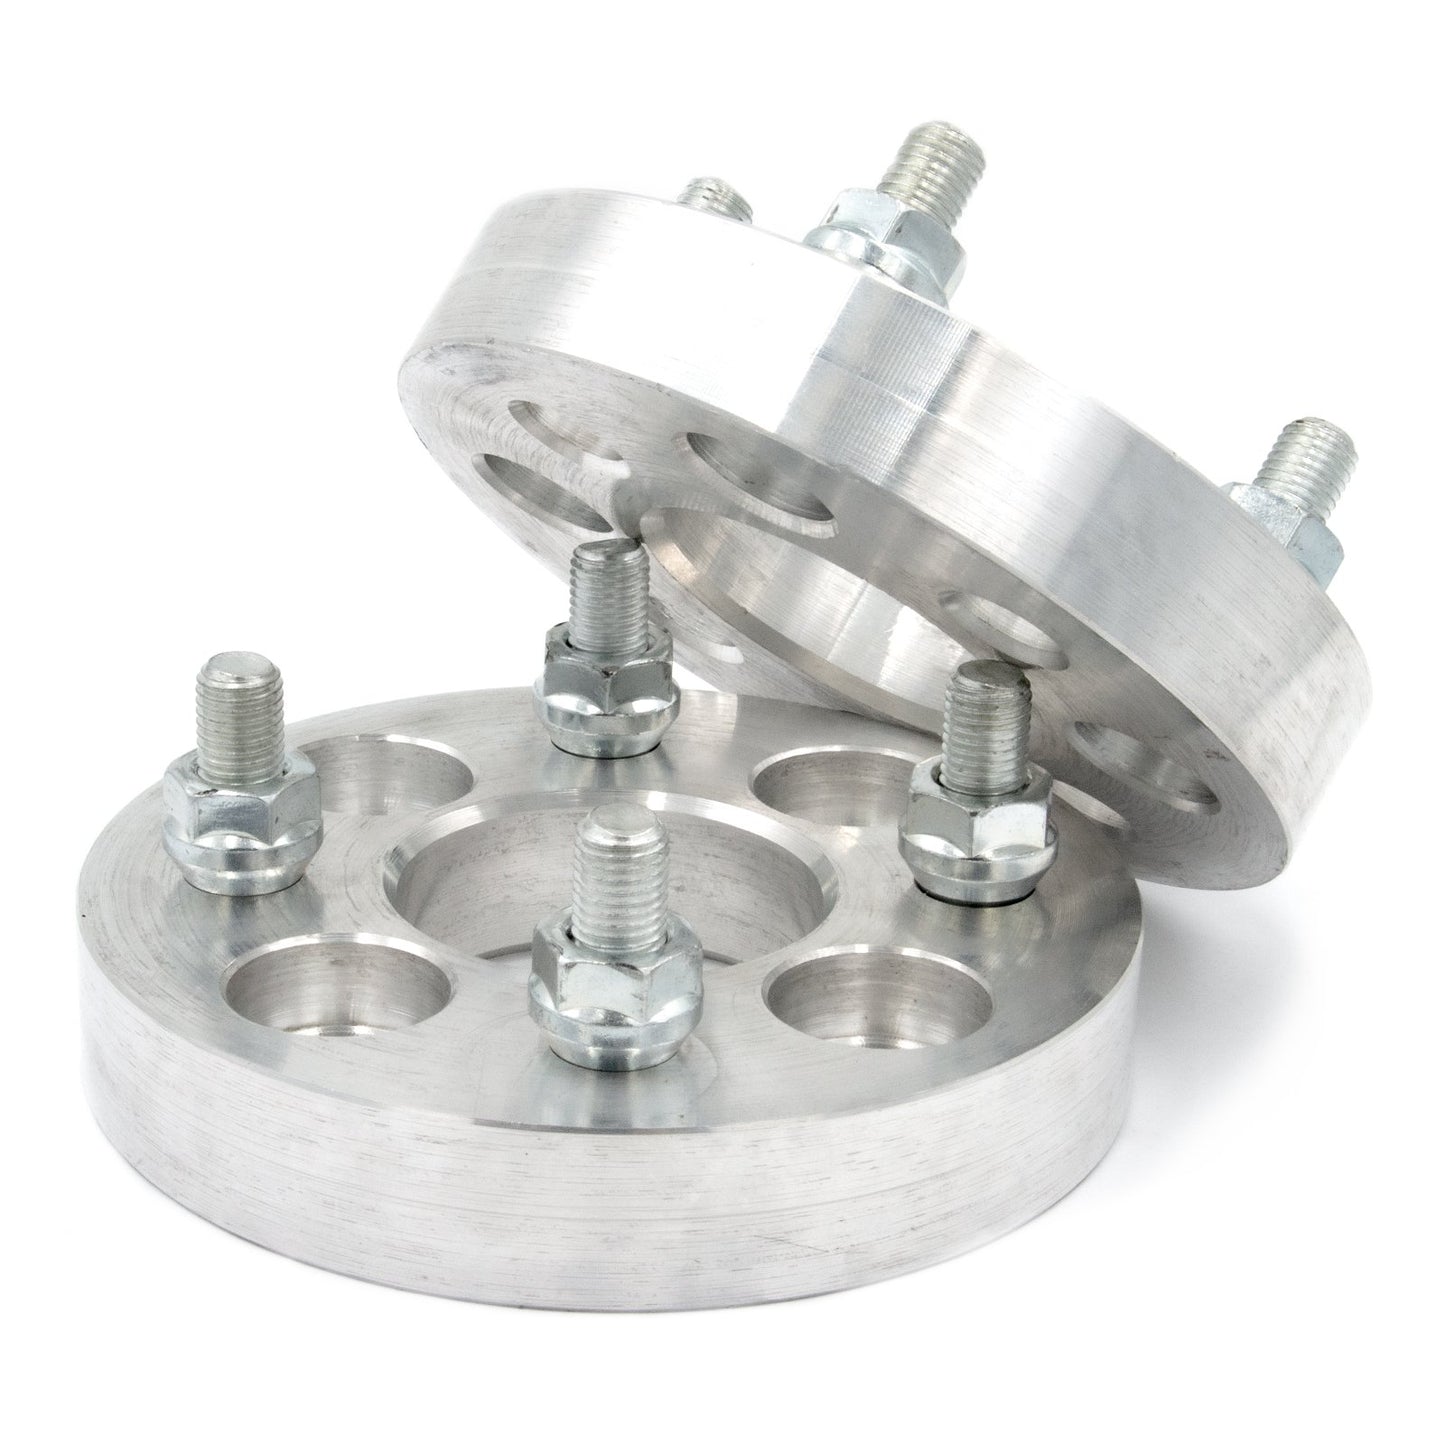 4x100 to 4x140 Wheel Spacer/Adapter - Thickness: 3/4"- 4"